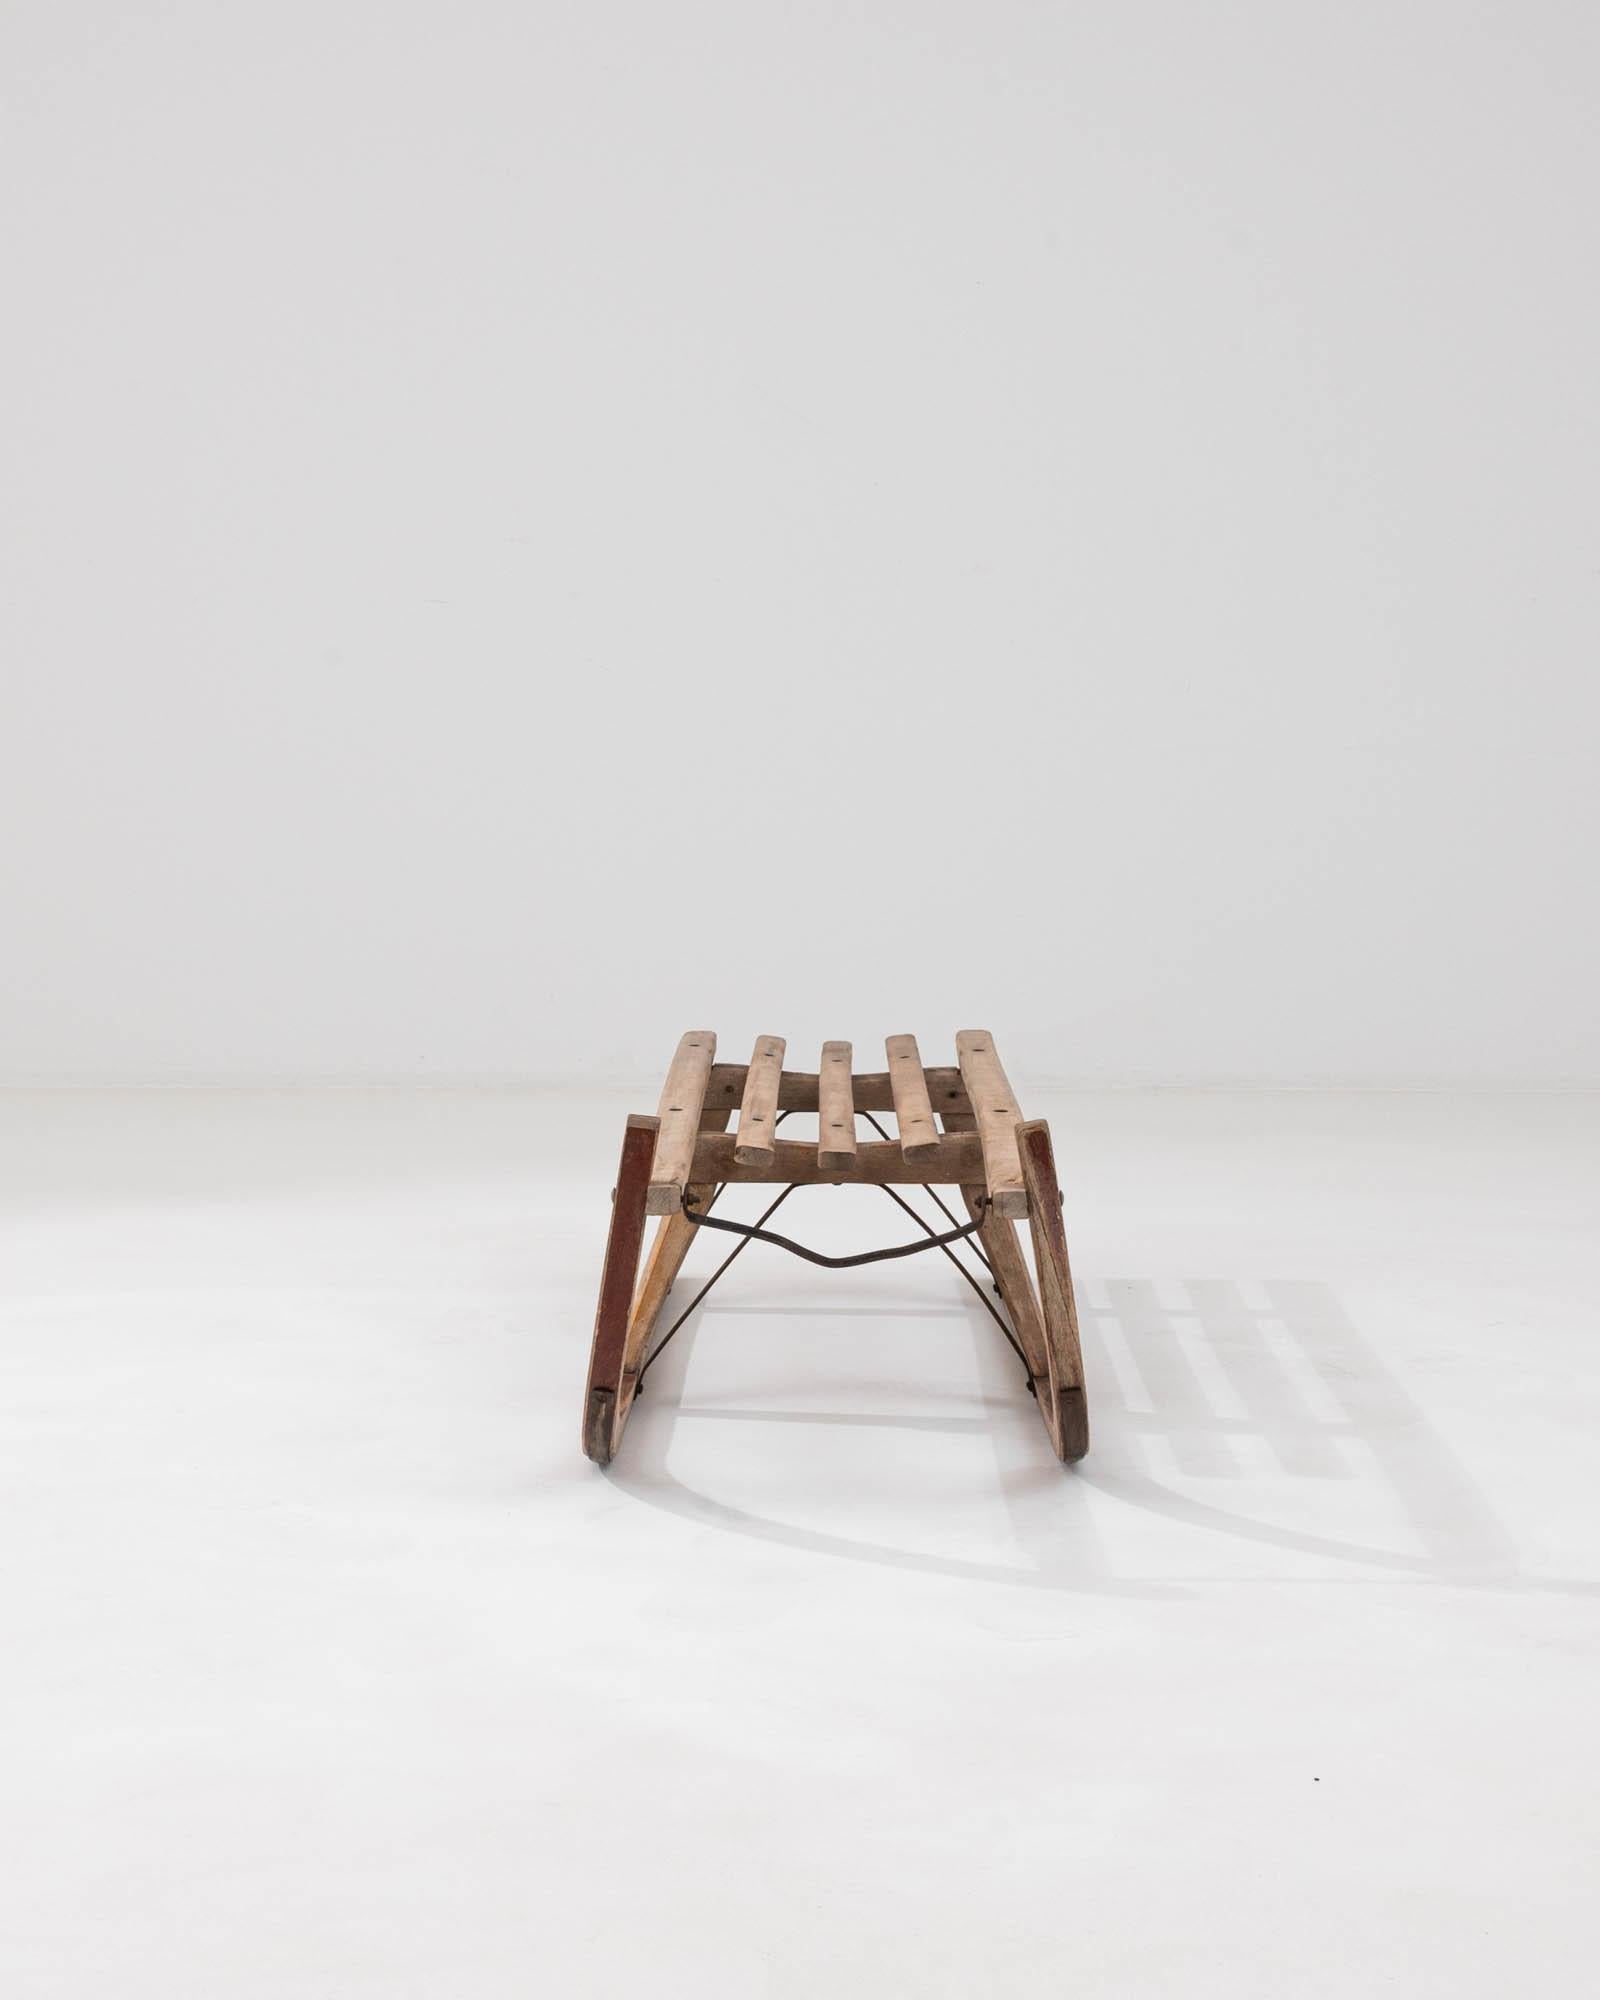 Introducing a remarkable piece of winter's past: the 20th Century German Wooden Sled by Davos. A nostalgic tribute to the snowy days of yore, this sled is a genuine collector's item, evoking the simple joy of gliding over a fresh blanket of snow.